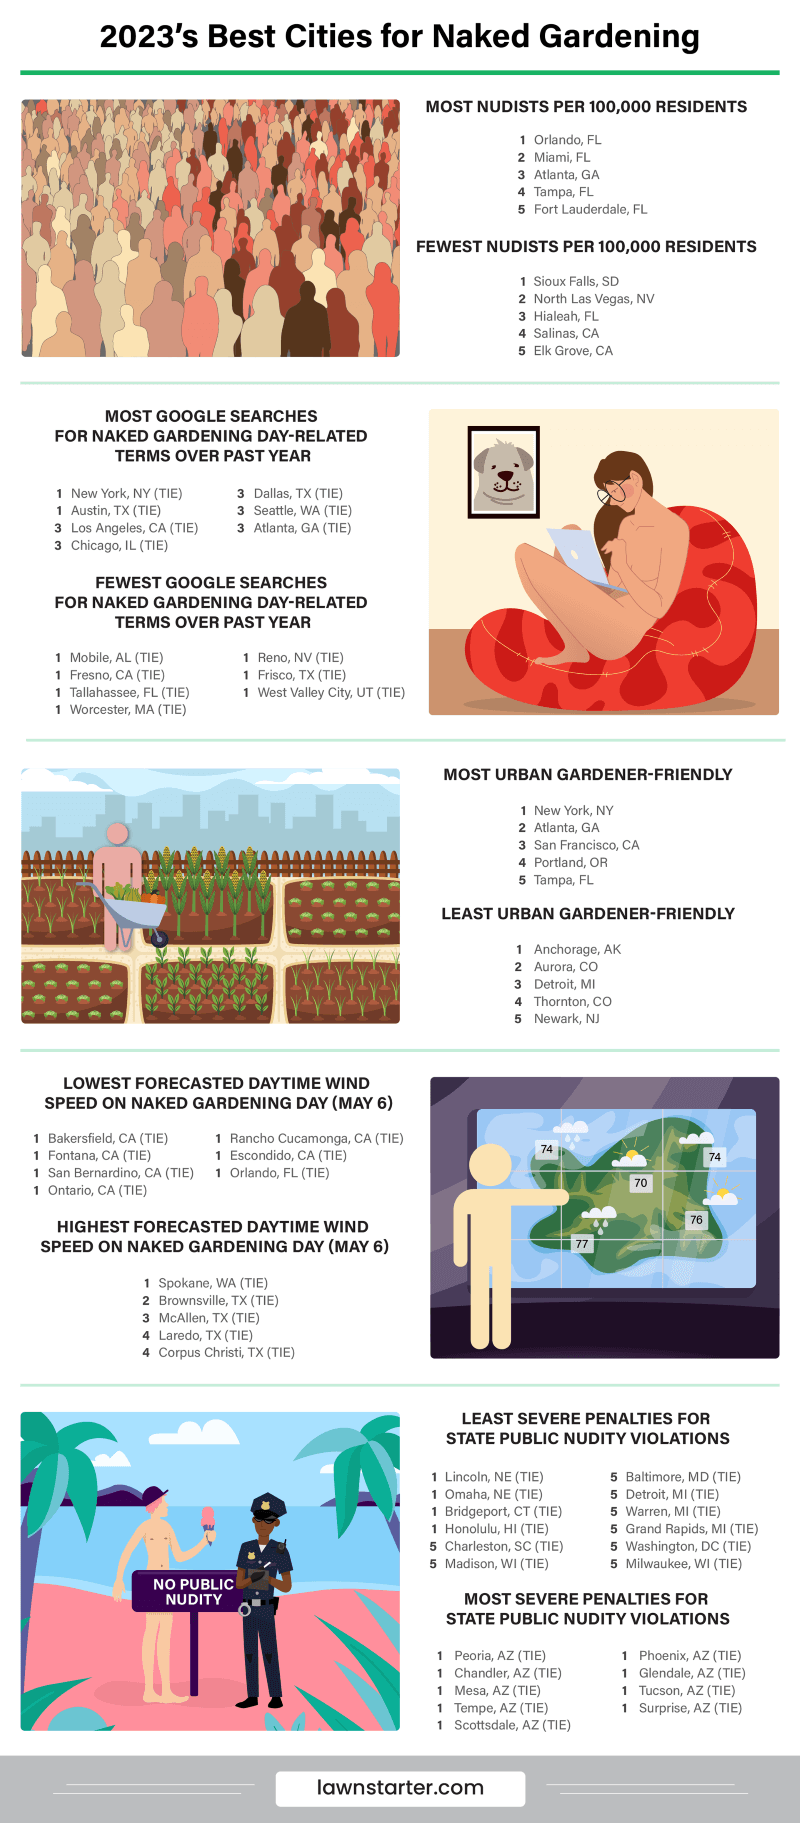 Infographic showing the Best Cities for Naked Gardening, a ranking based on legality of public nudity, gardener-friendliness, weather forecasts, and more